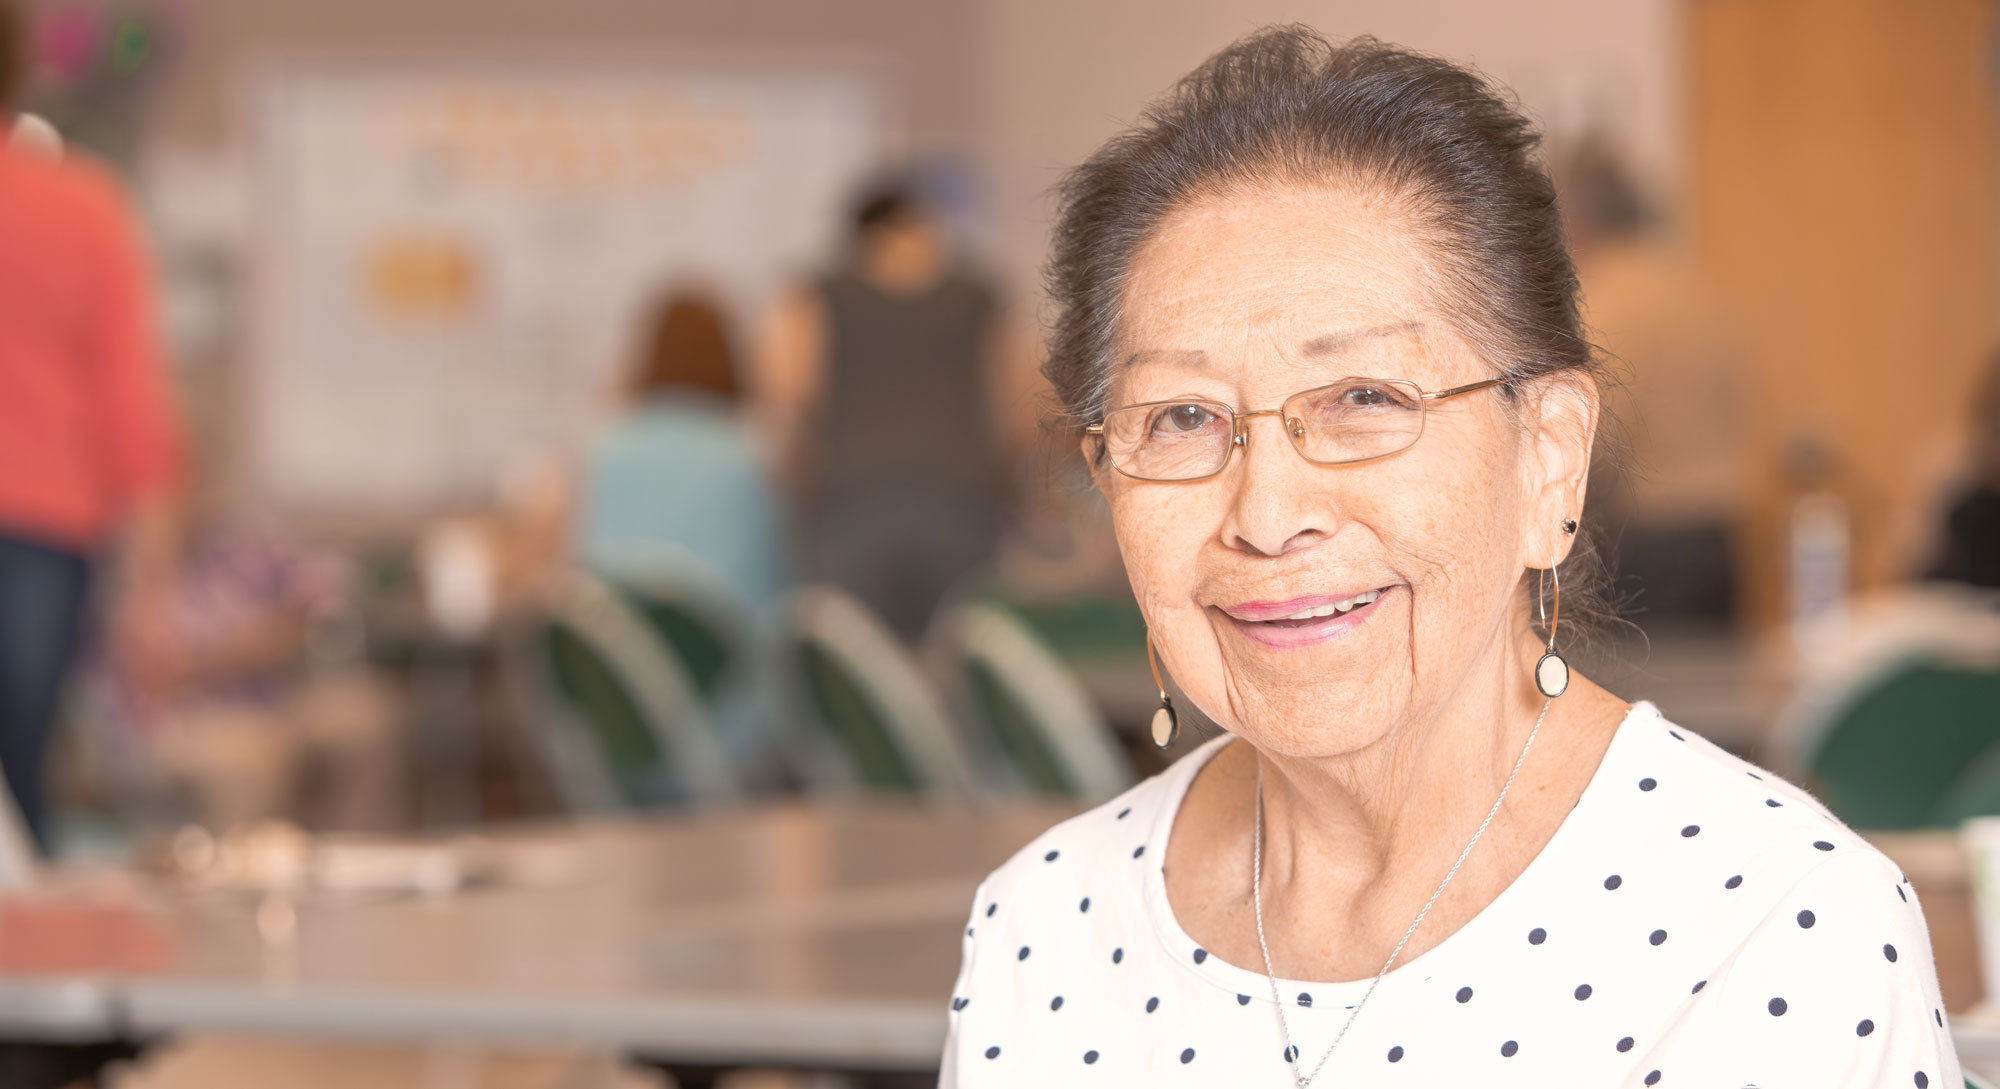 Smiling senior woman on blurred background